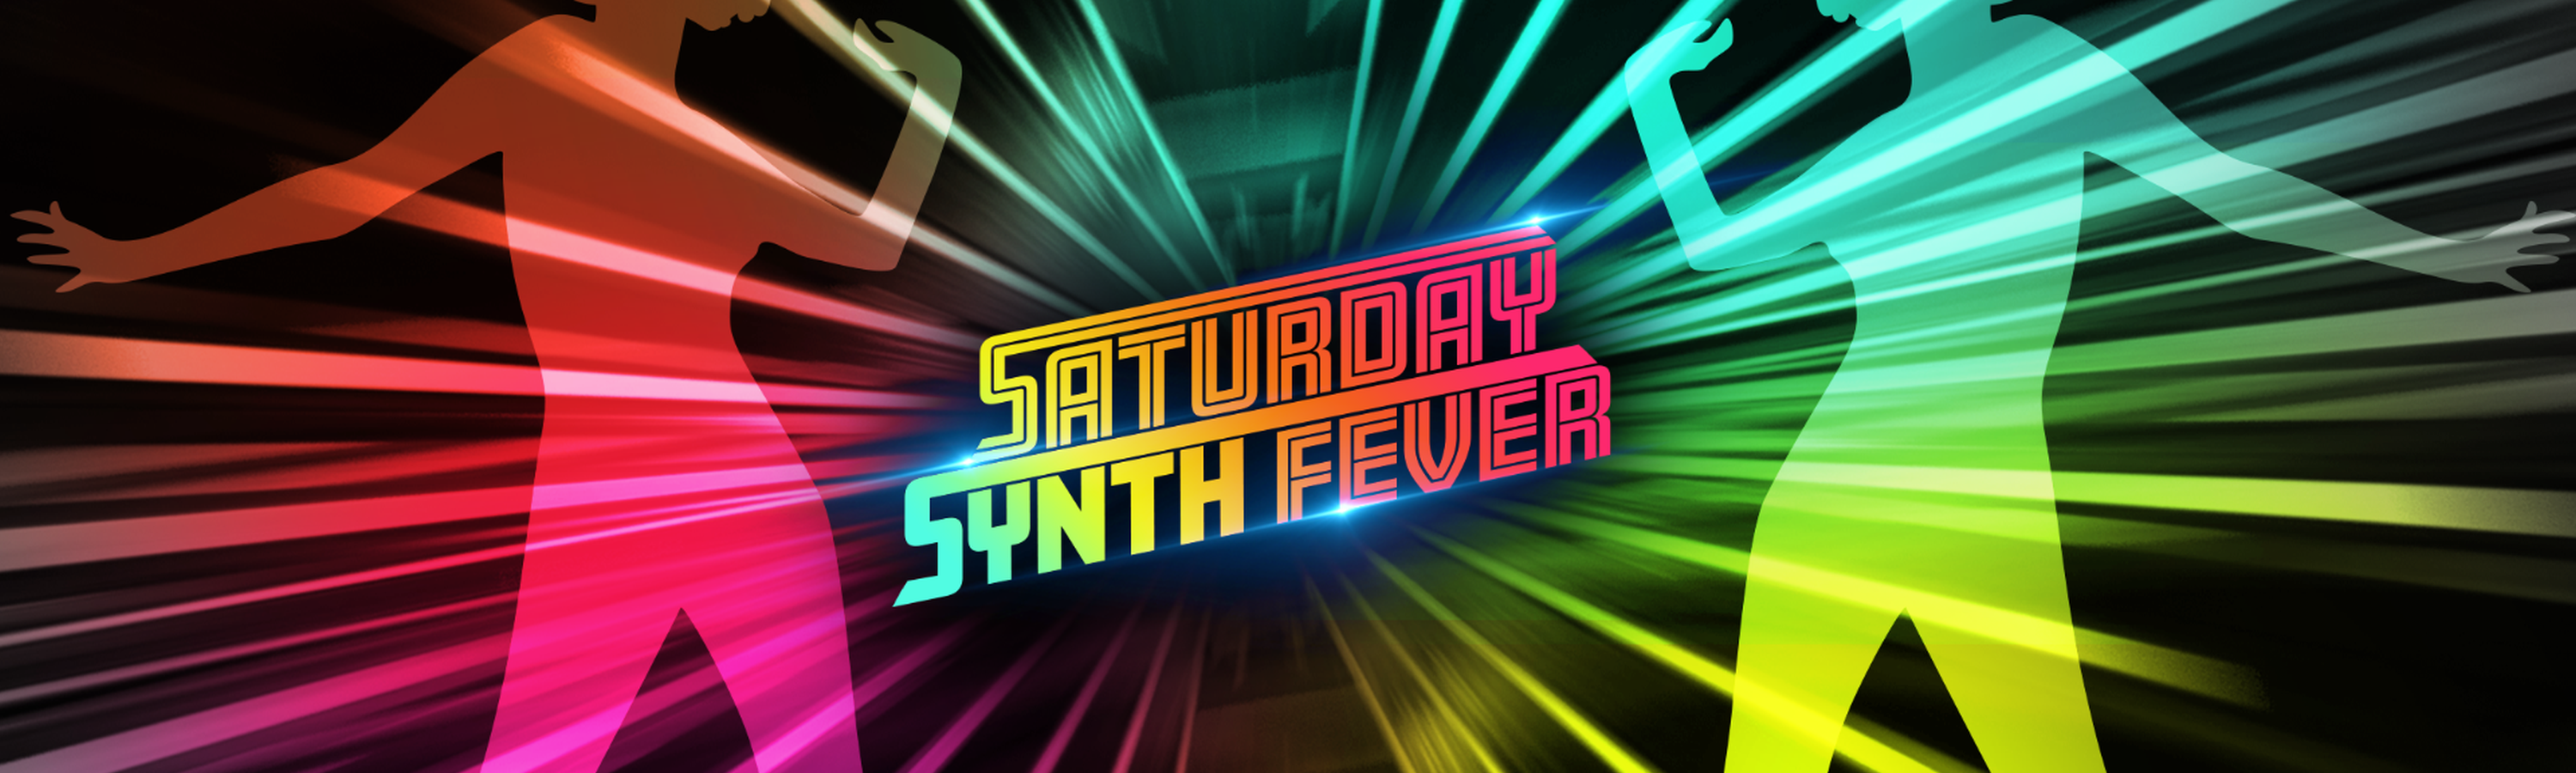 Saturday Synth Fever Events